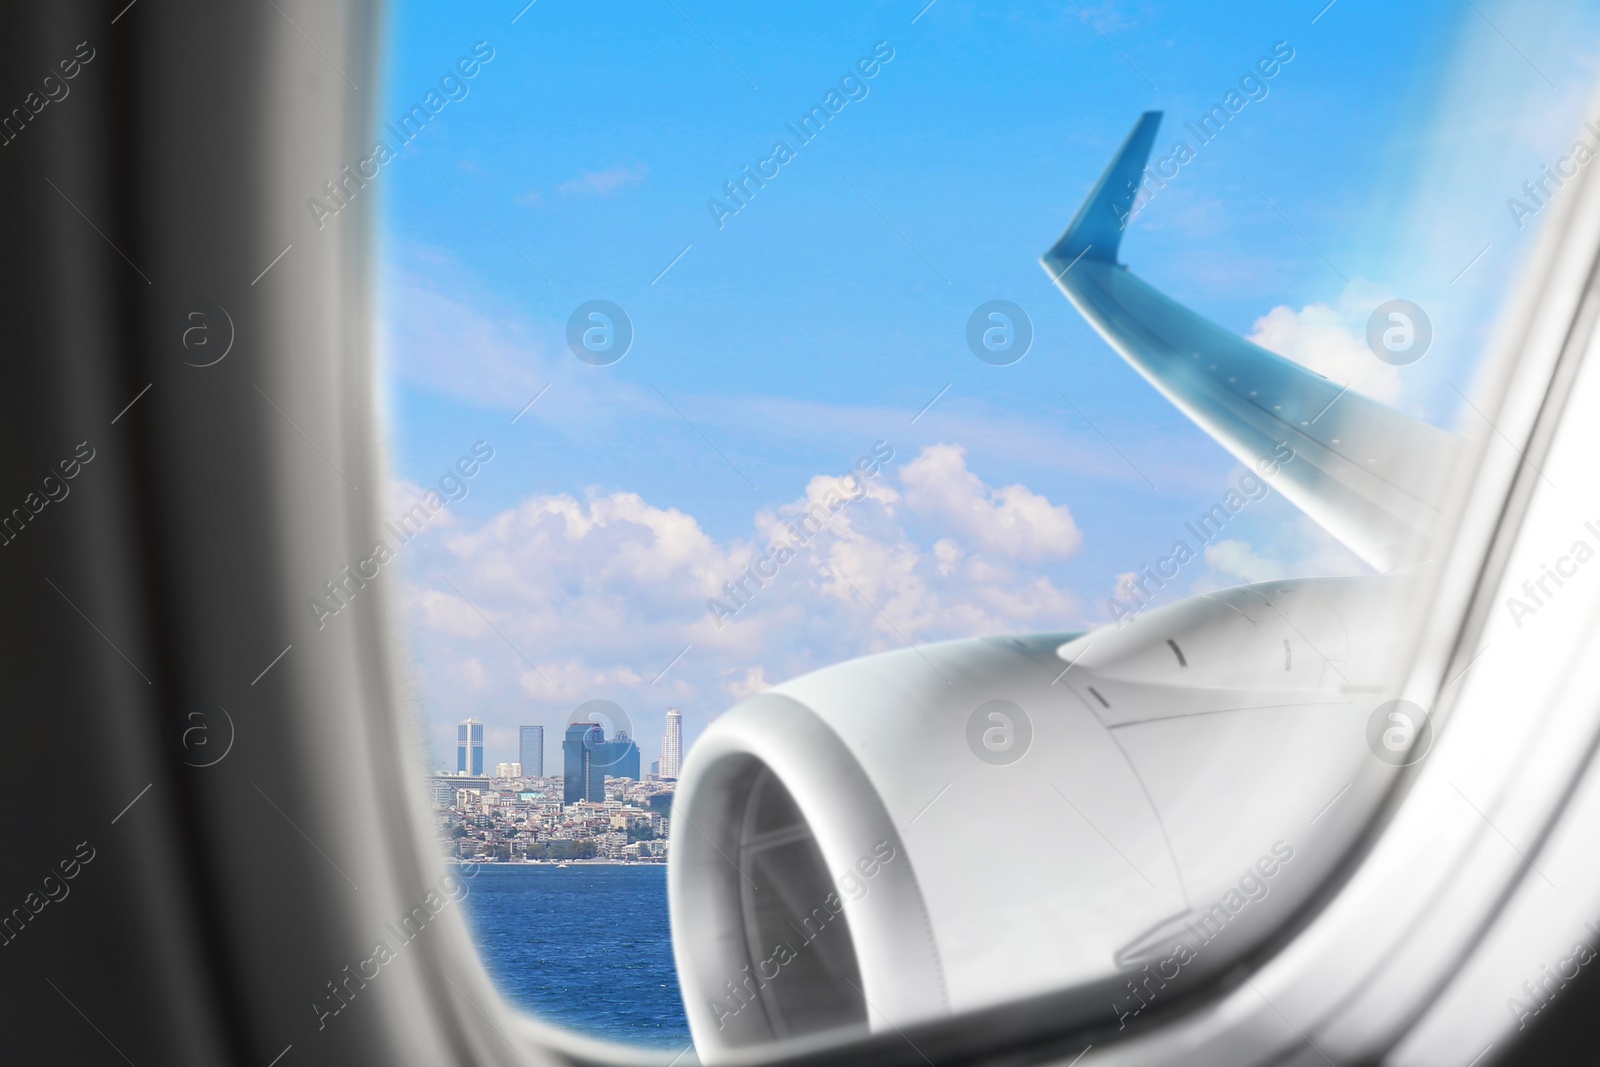 Image of Beautiful view of city and sea through airplane window during flight